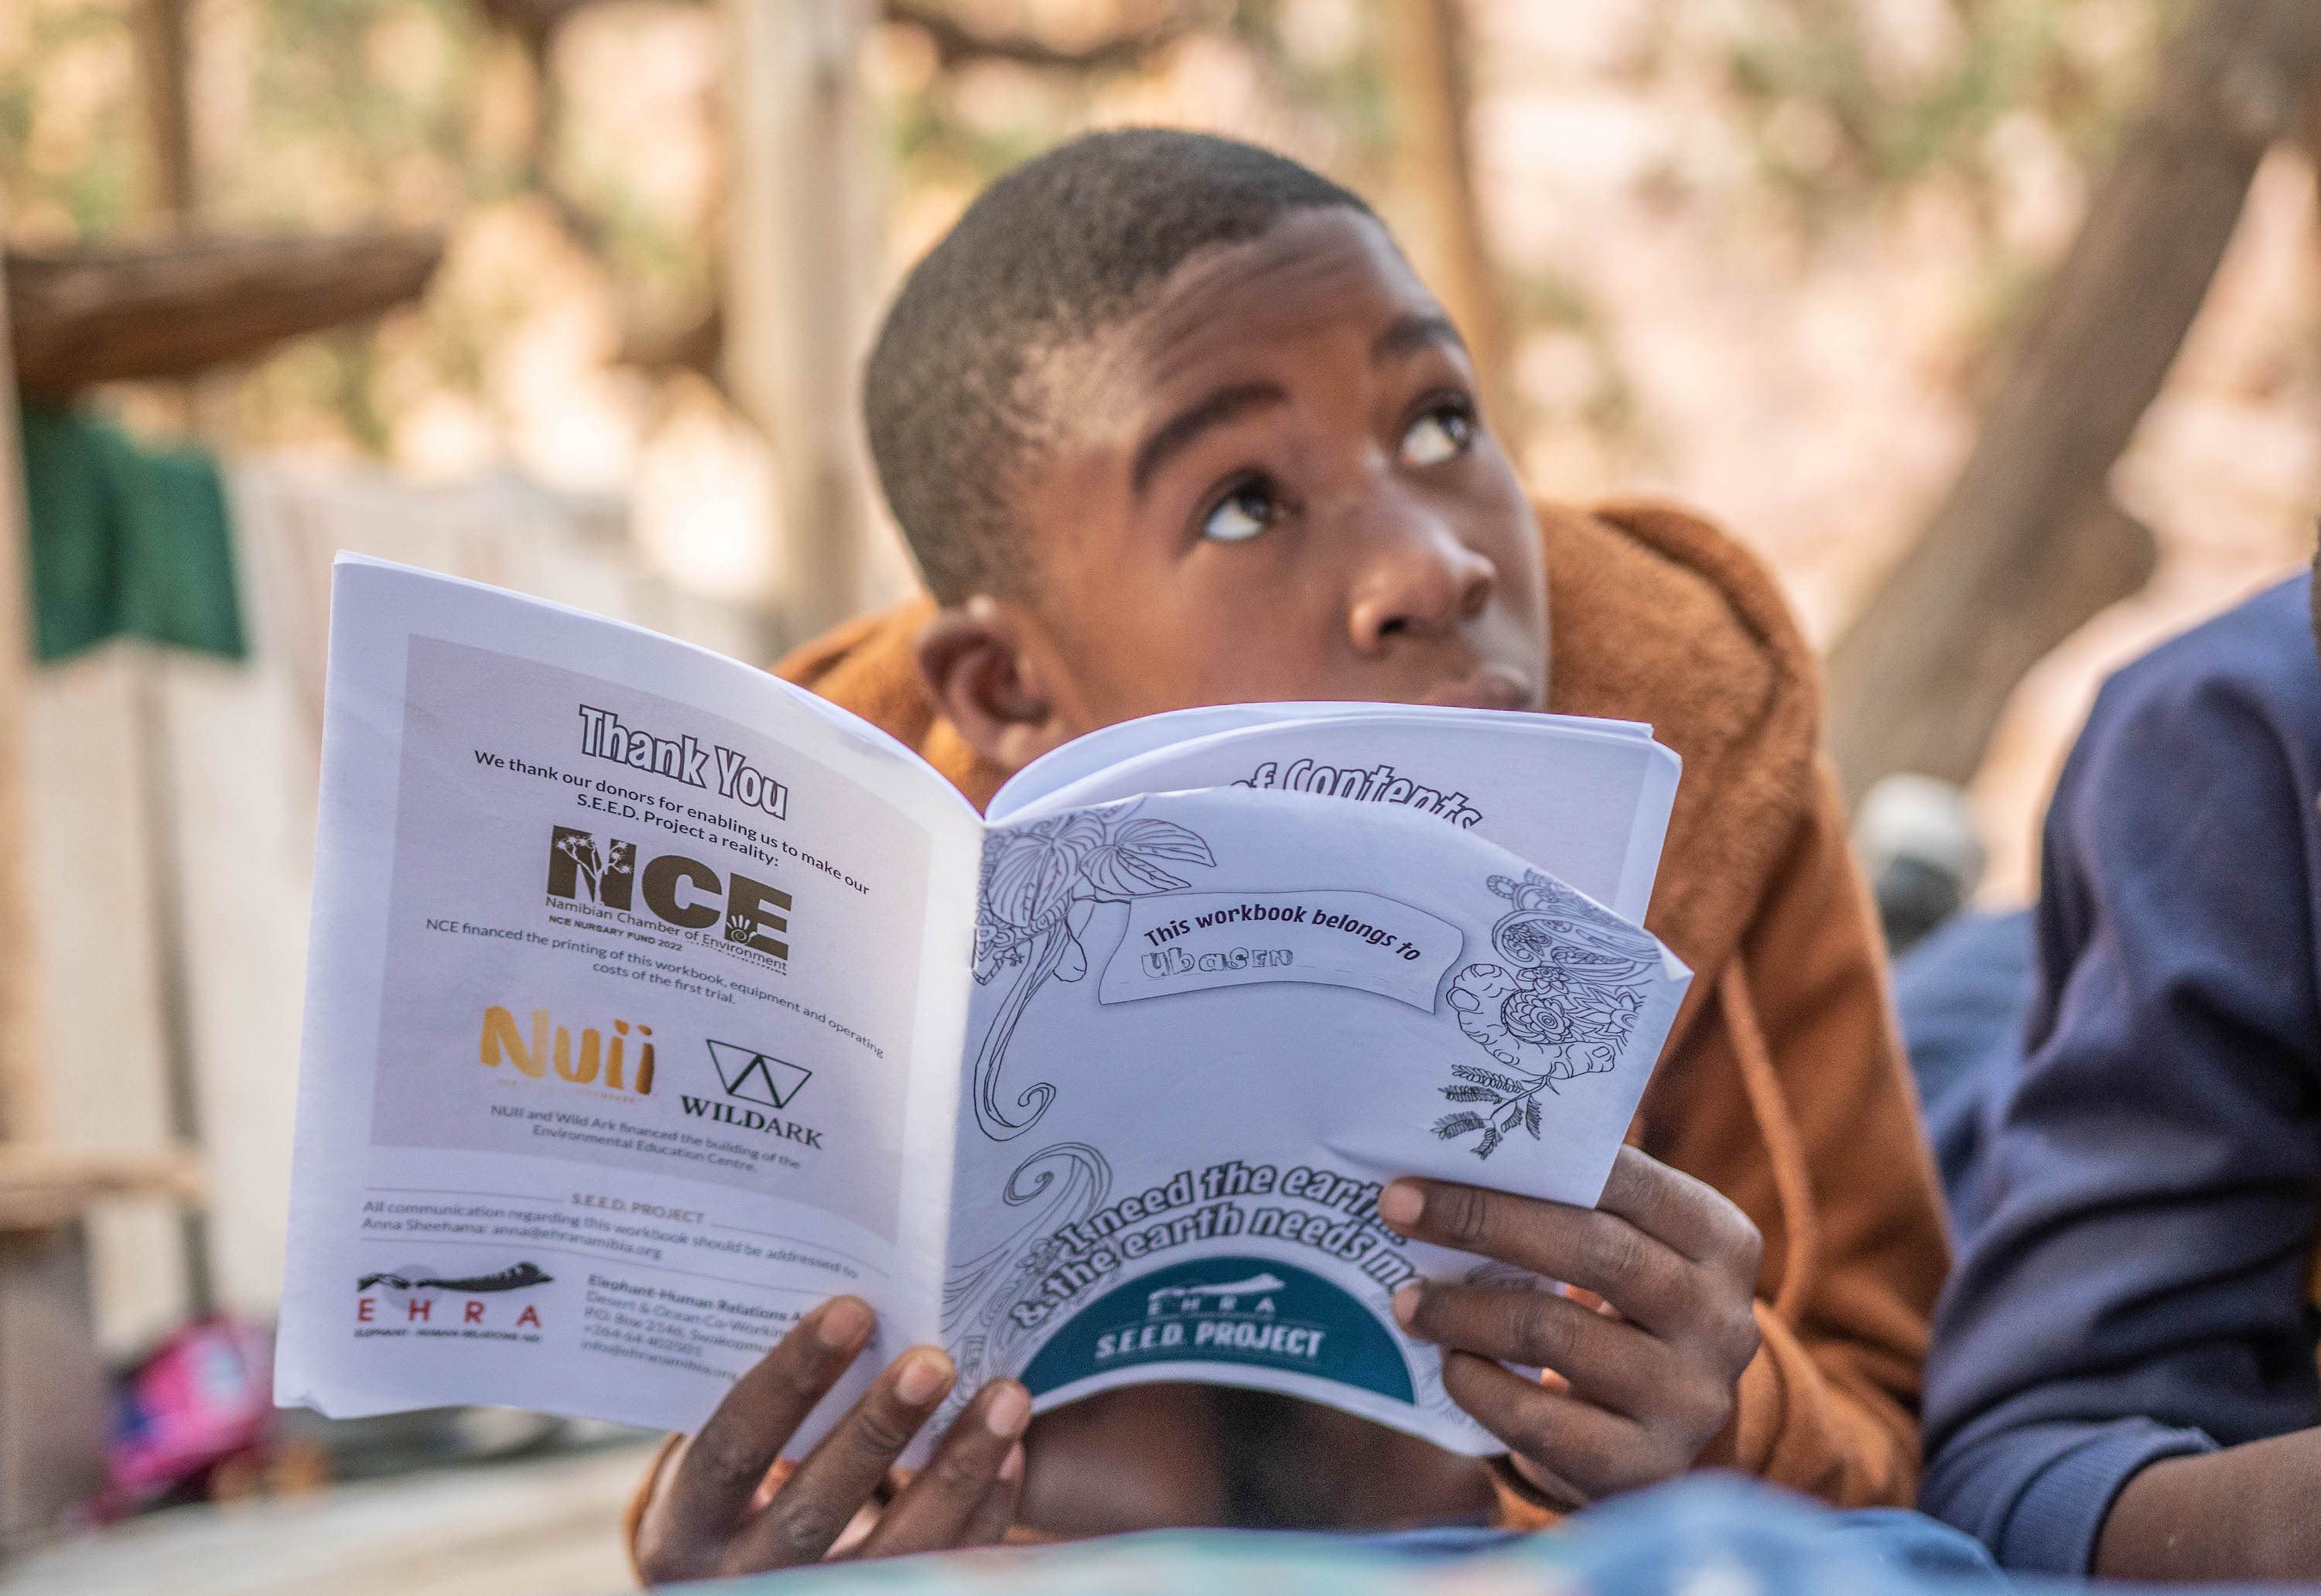 A child looks up while reading the EHRA education booklet.